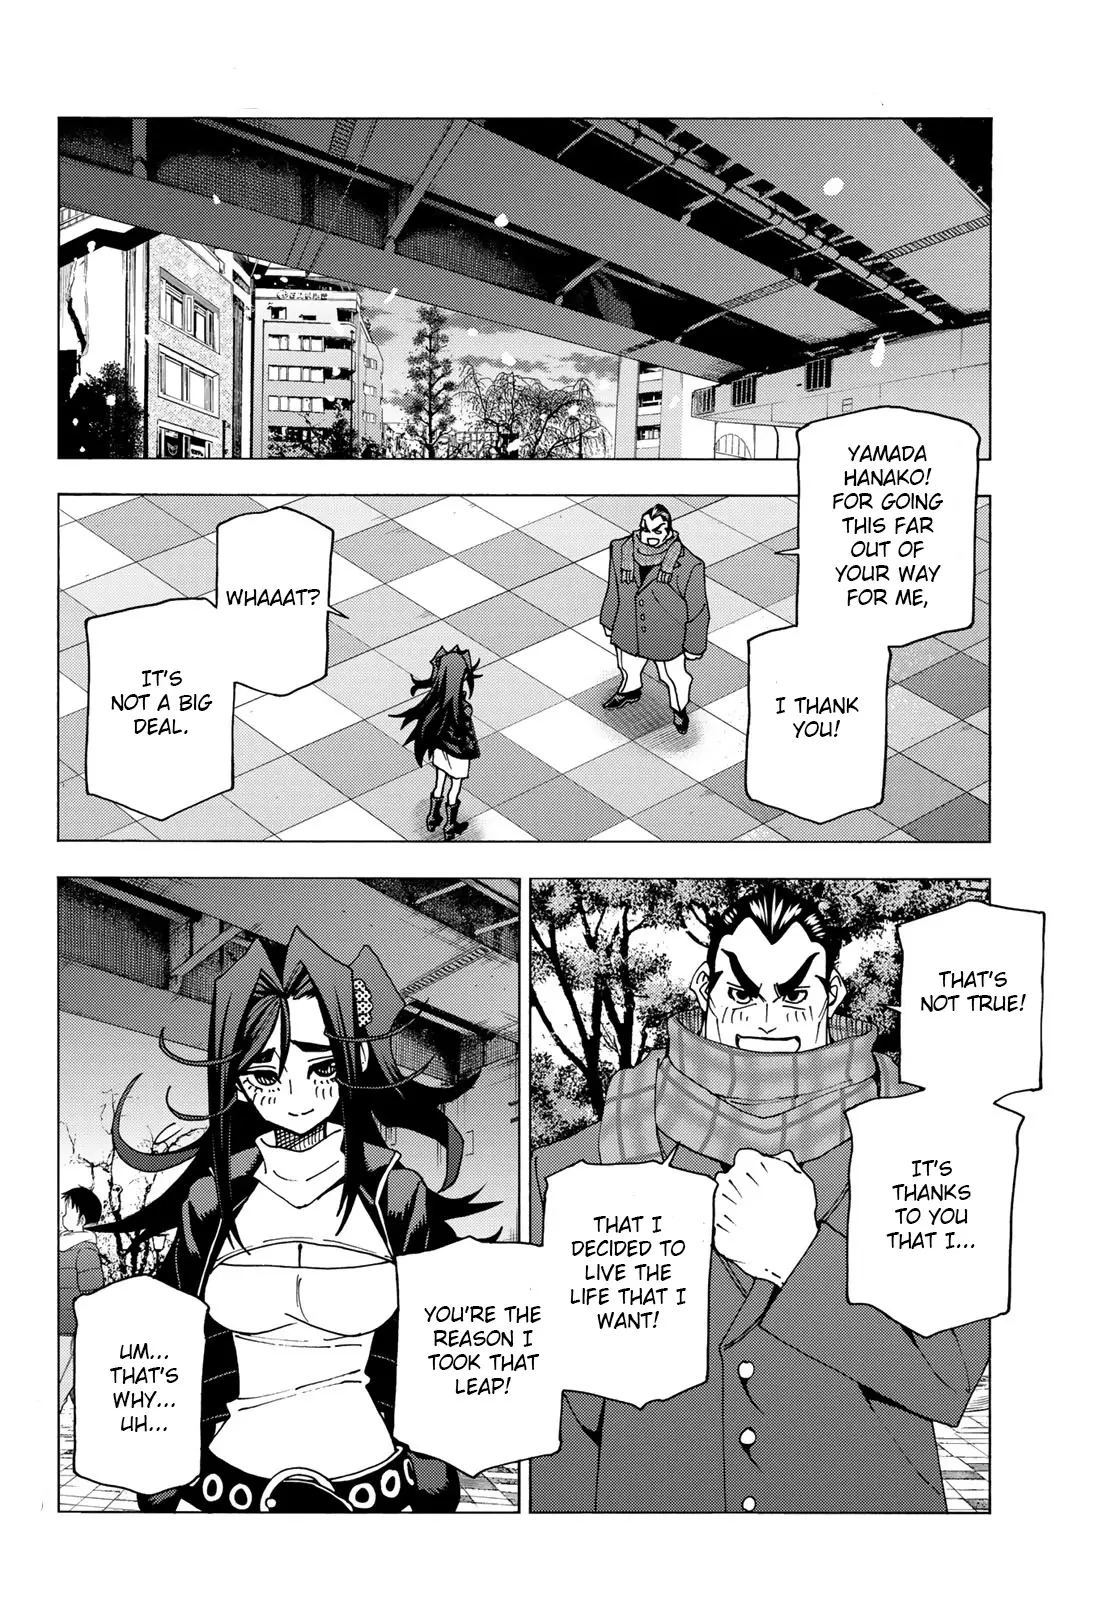 The Story Between A Dumb Prefect And A High School Girl With An Inappropriate Skirt Length - 55 page 8-c81158a0